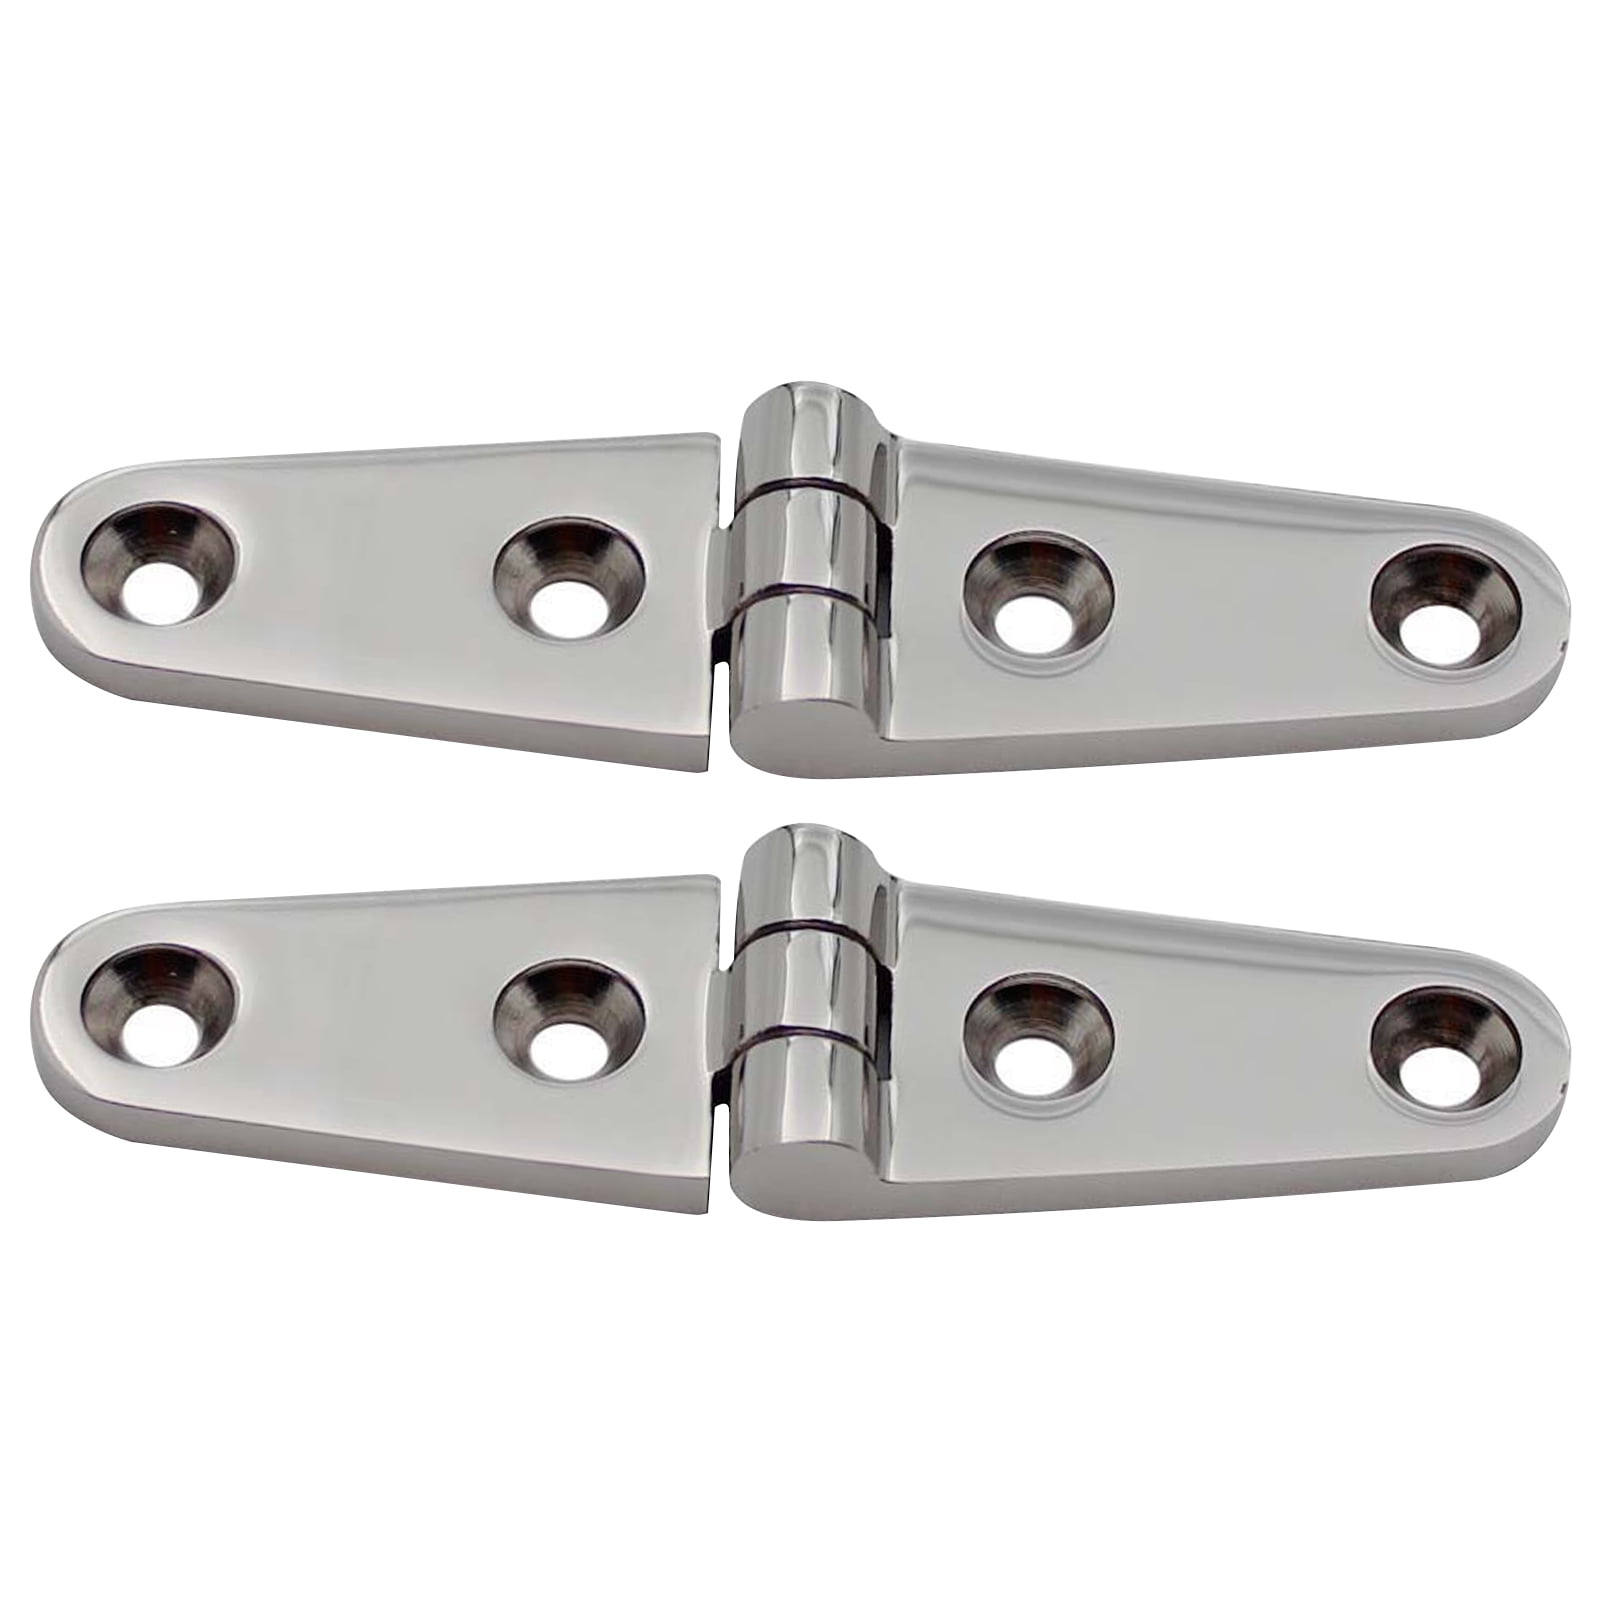 2Pcs Stainless Steel Heavy Duty Hinges for Marine Boat Door Cabinet Hinges 